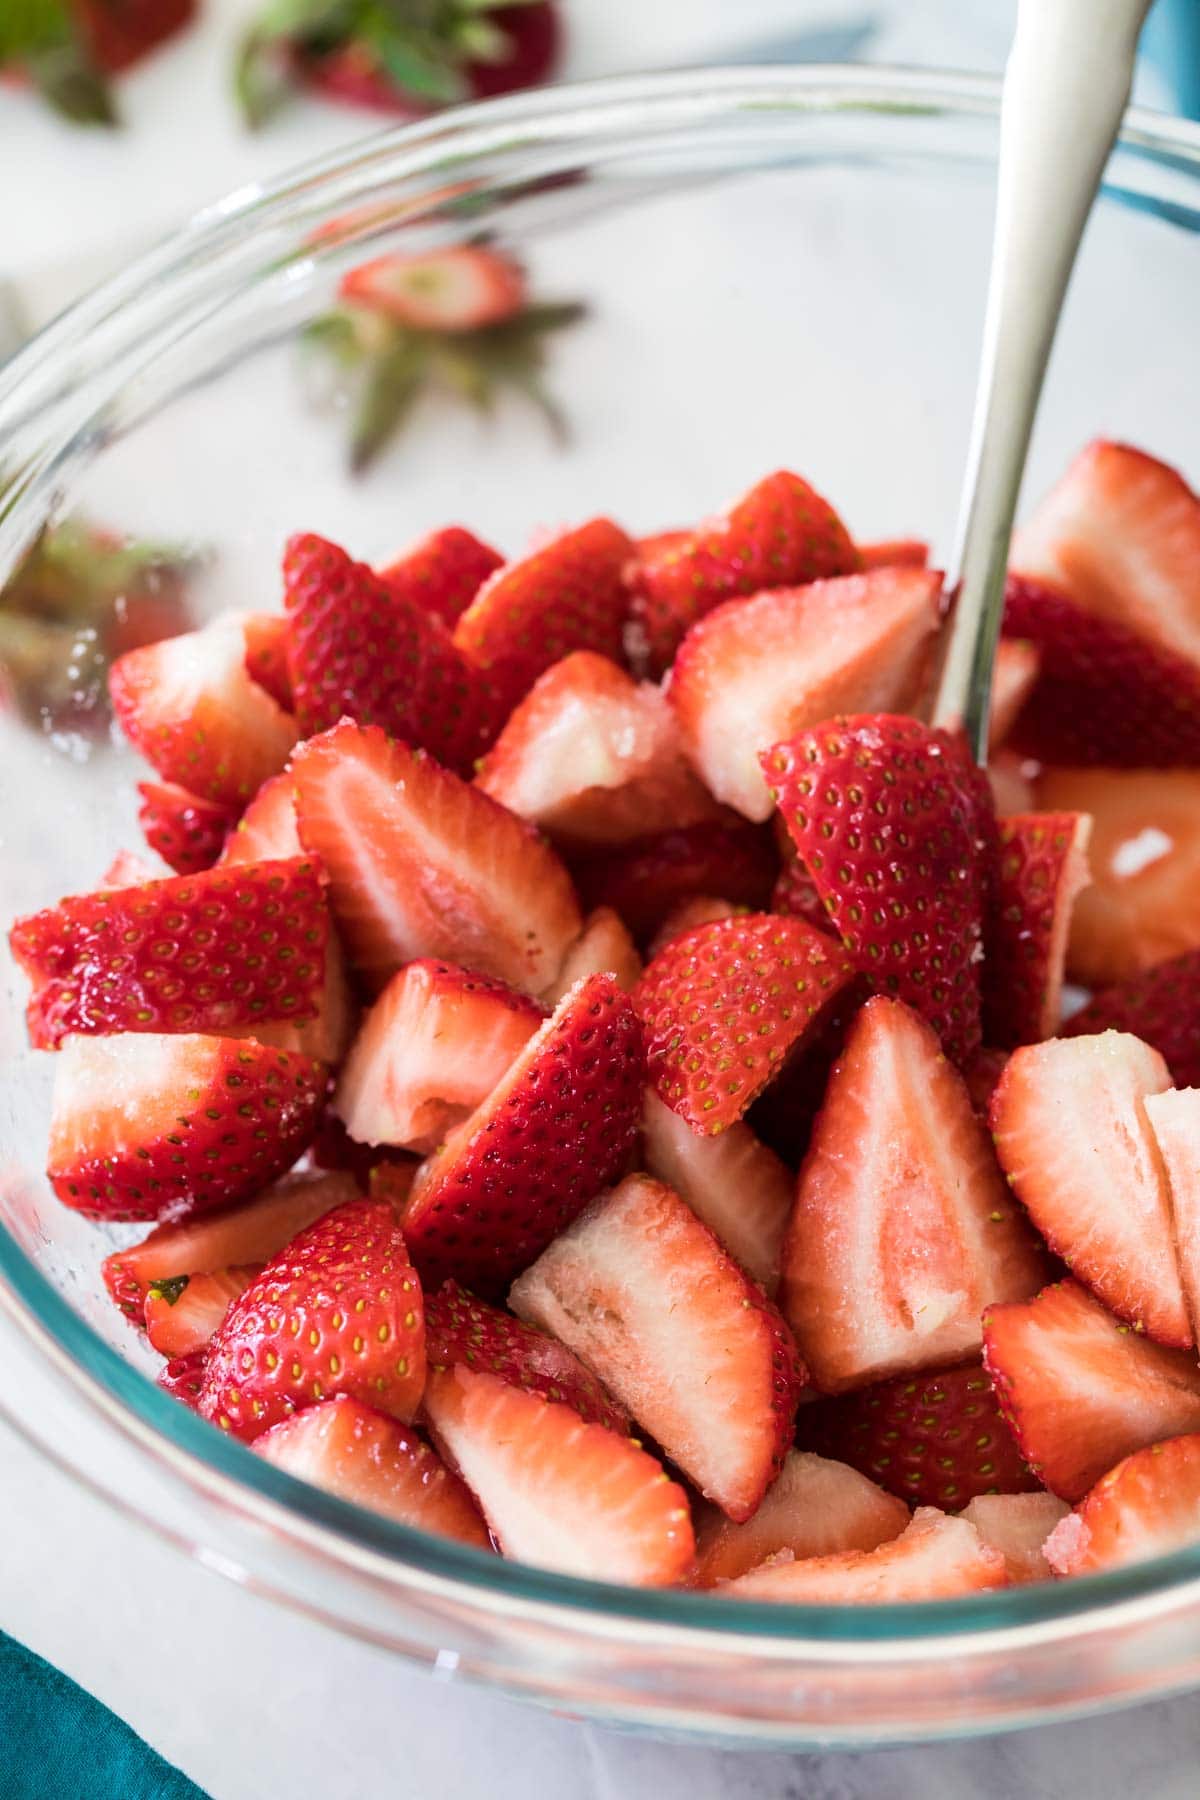 Clear glass mixing bowl filled with cut strawberries.